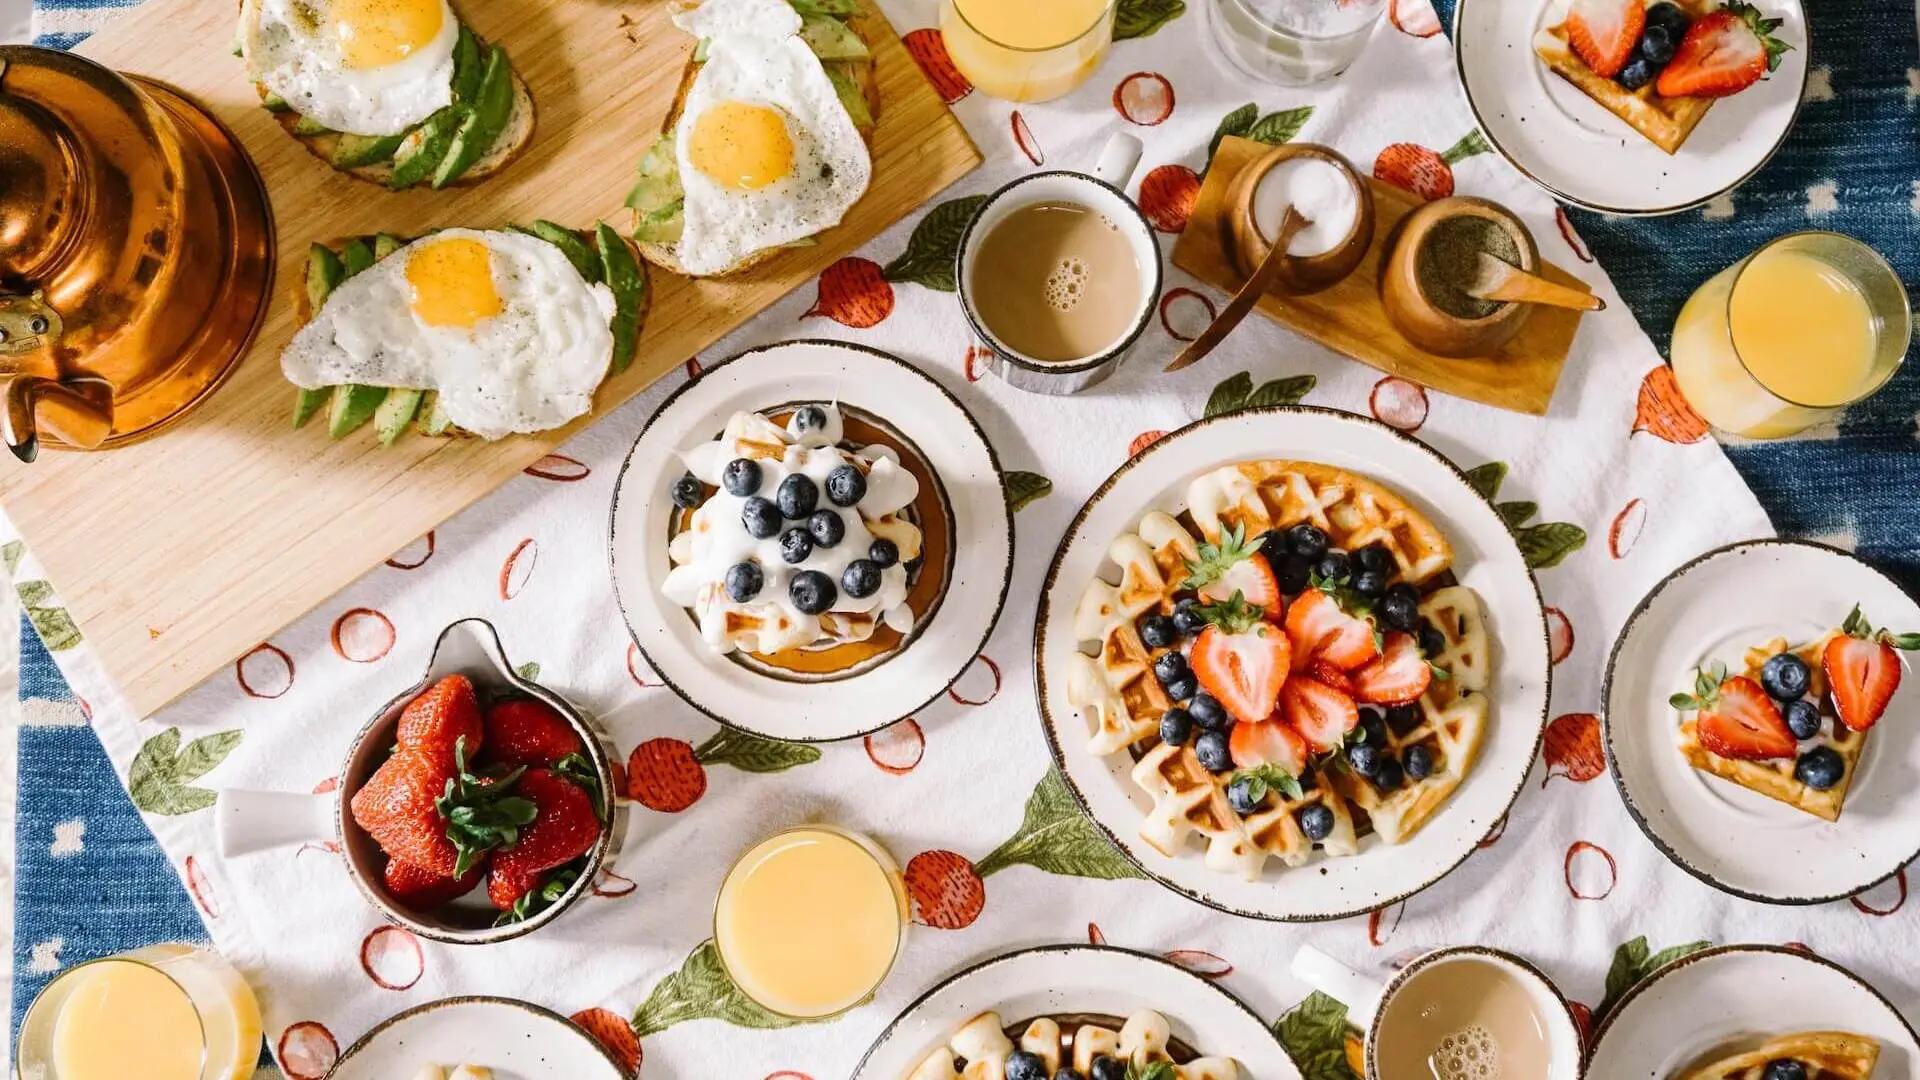 A spread of a brunch table featuring waffles topped with berries, open-faced sandwiches with fried eggs, beverages, and fresh fruit, ideal for refueling during Ireland Tours.